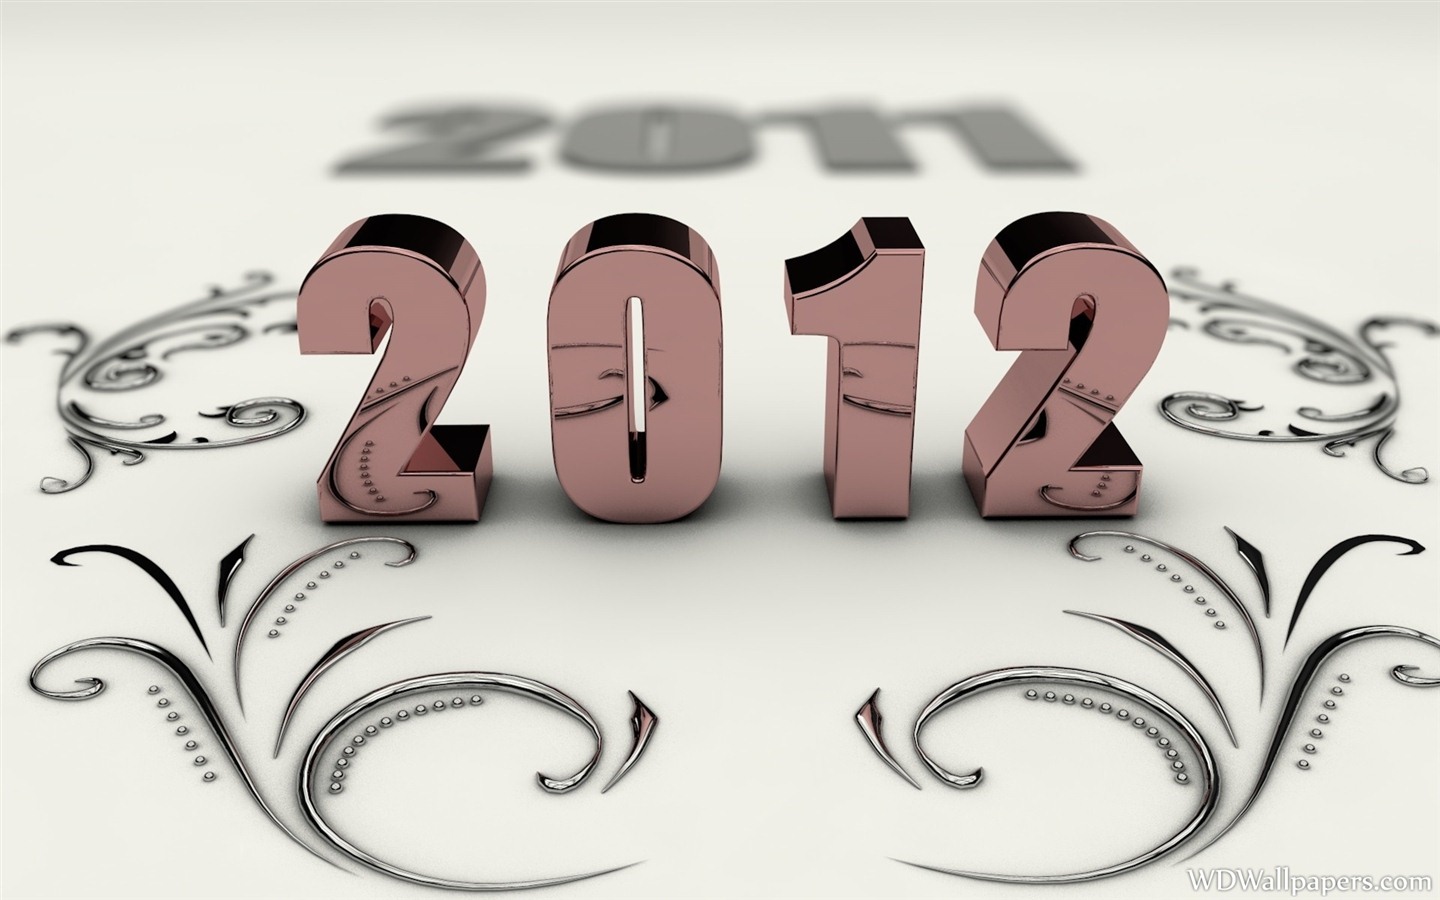 2012 New Year wallpapers (1) #8 - 1440x900